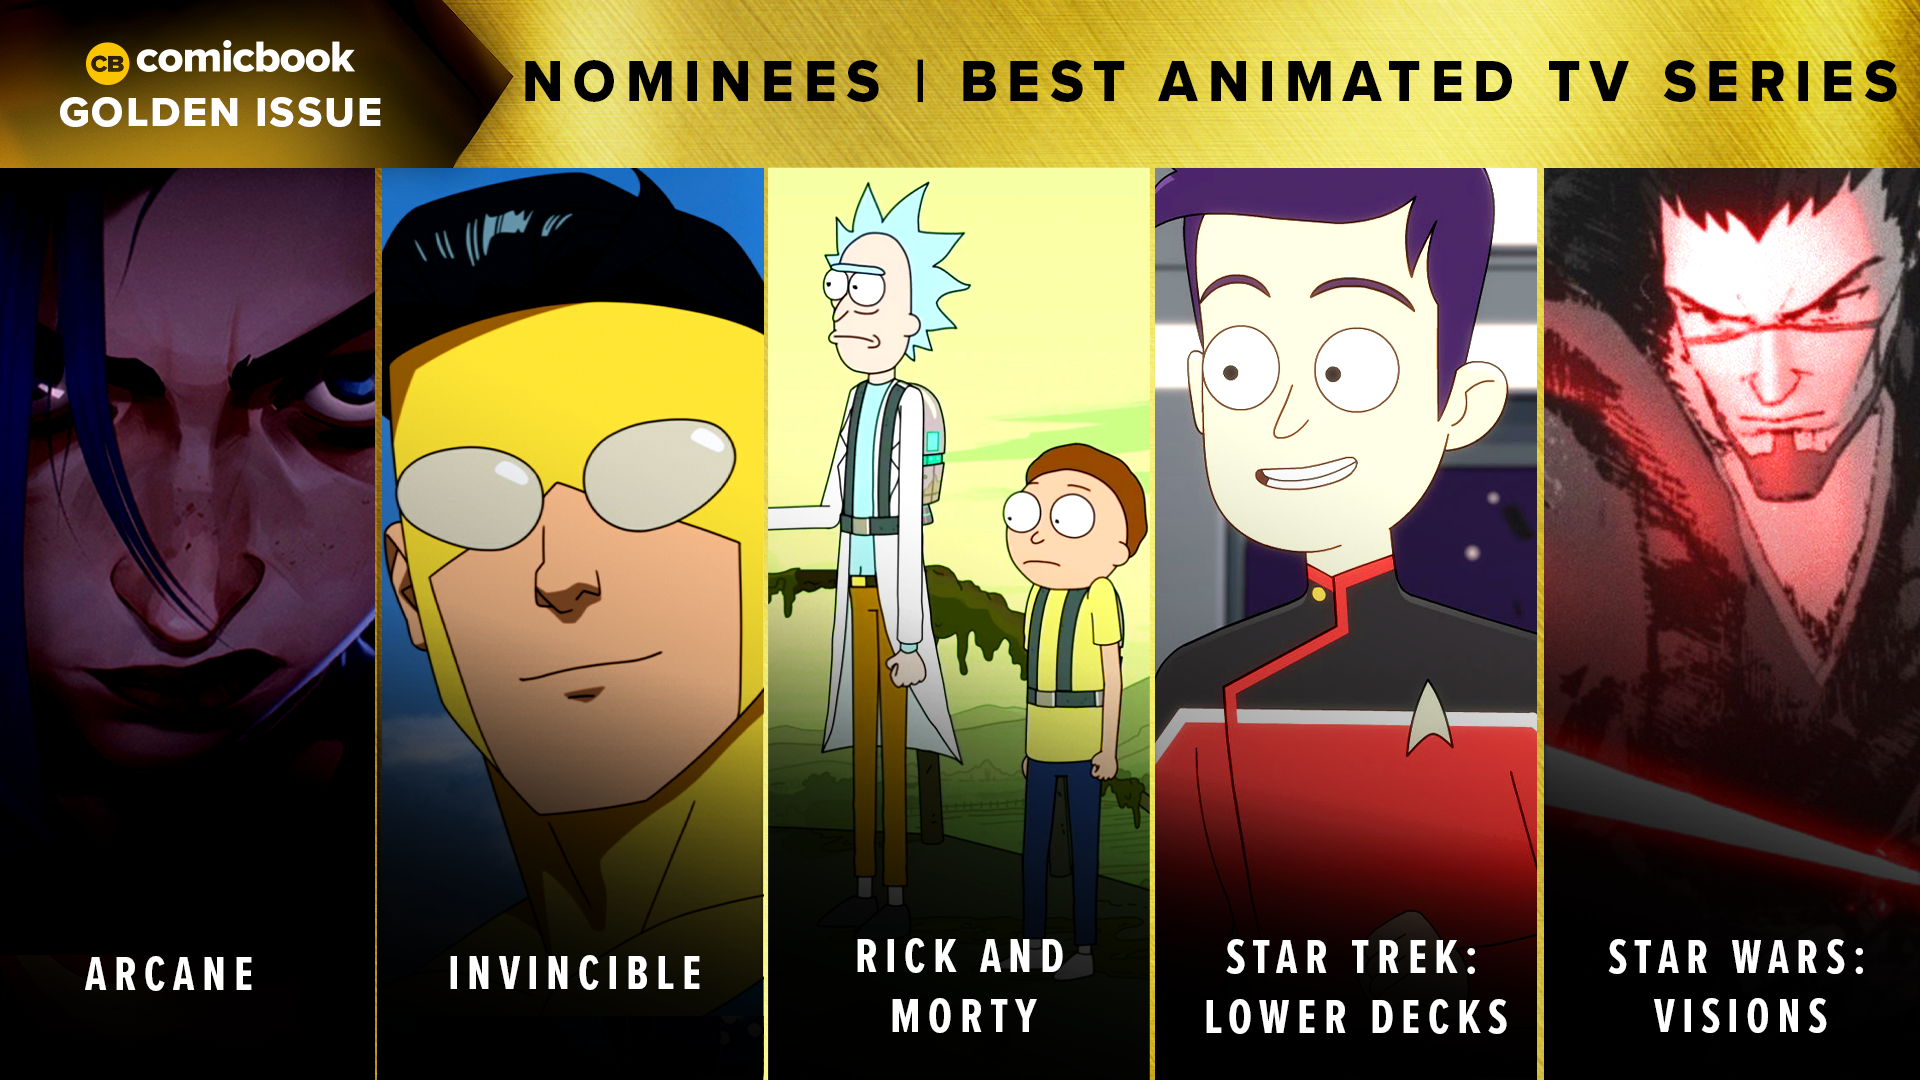 golden-issues-2021-nominees-best-animated-tv-series.png